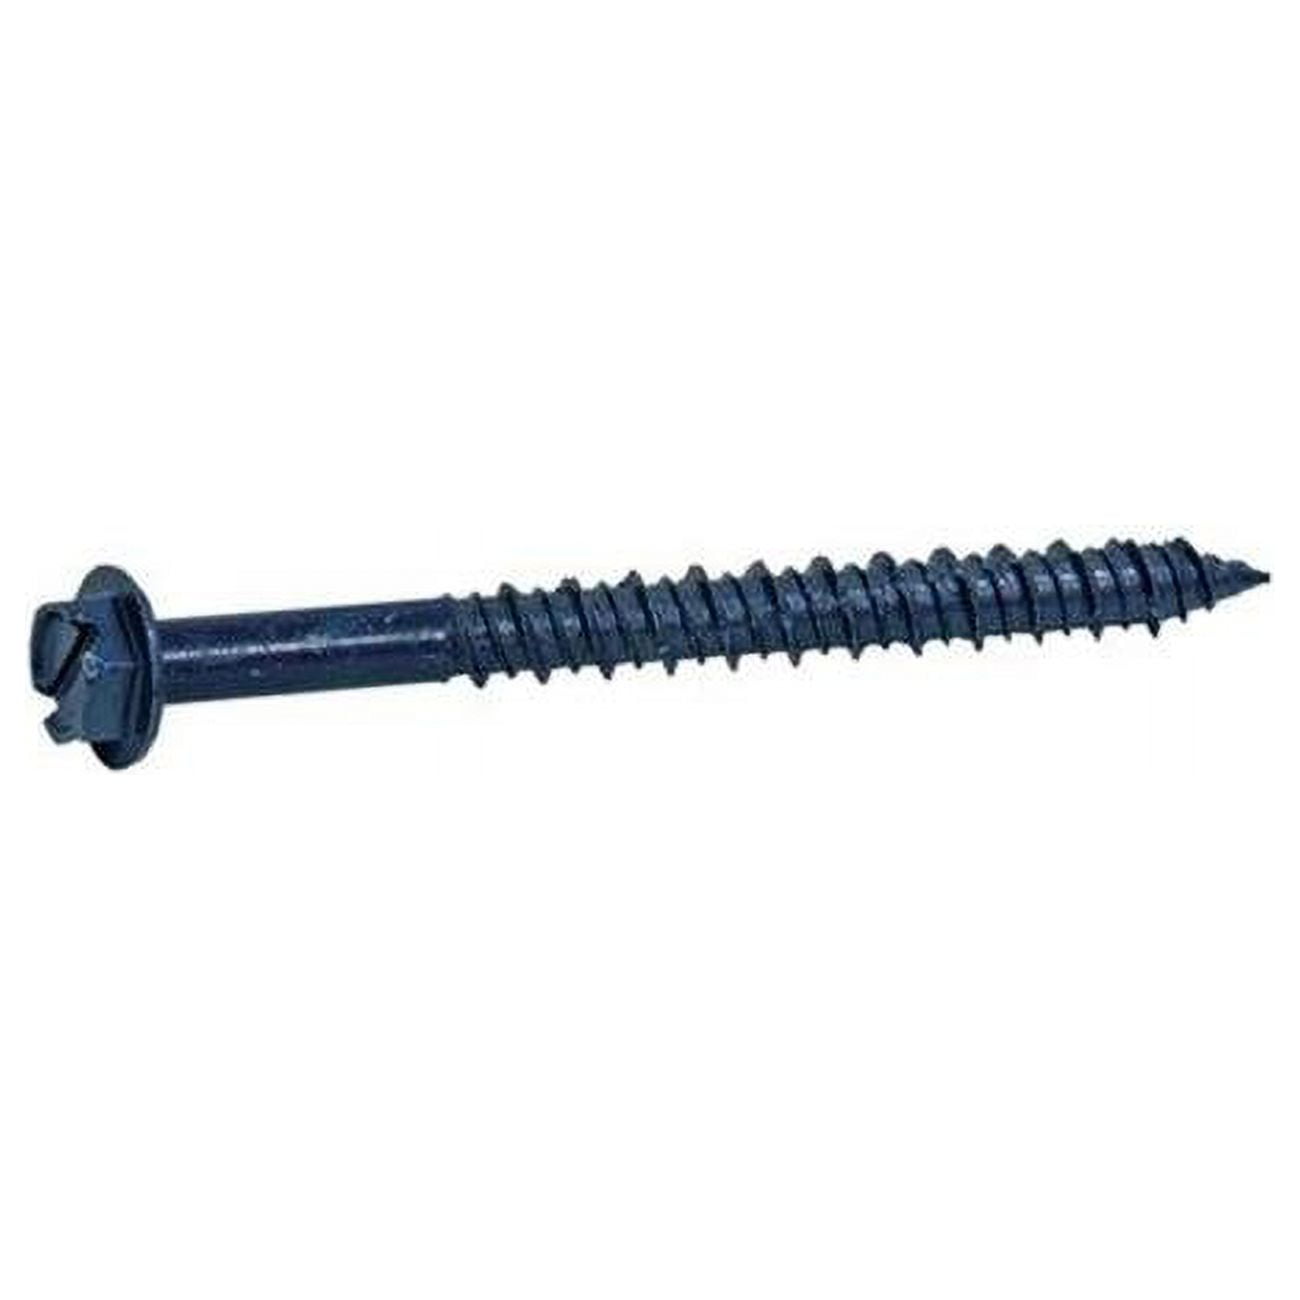 Picture of Grip-Rite 5025252 0.187 x 3.25 in. 1 lbs Hex Washer Head Steel Concrete Screws 